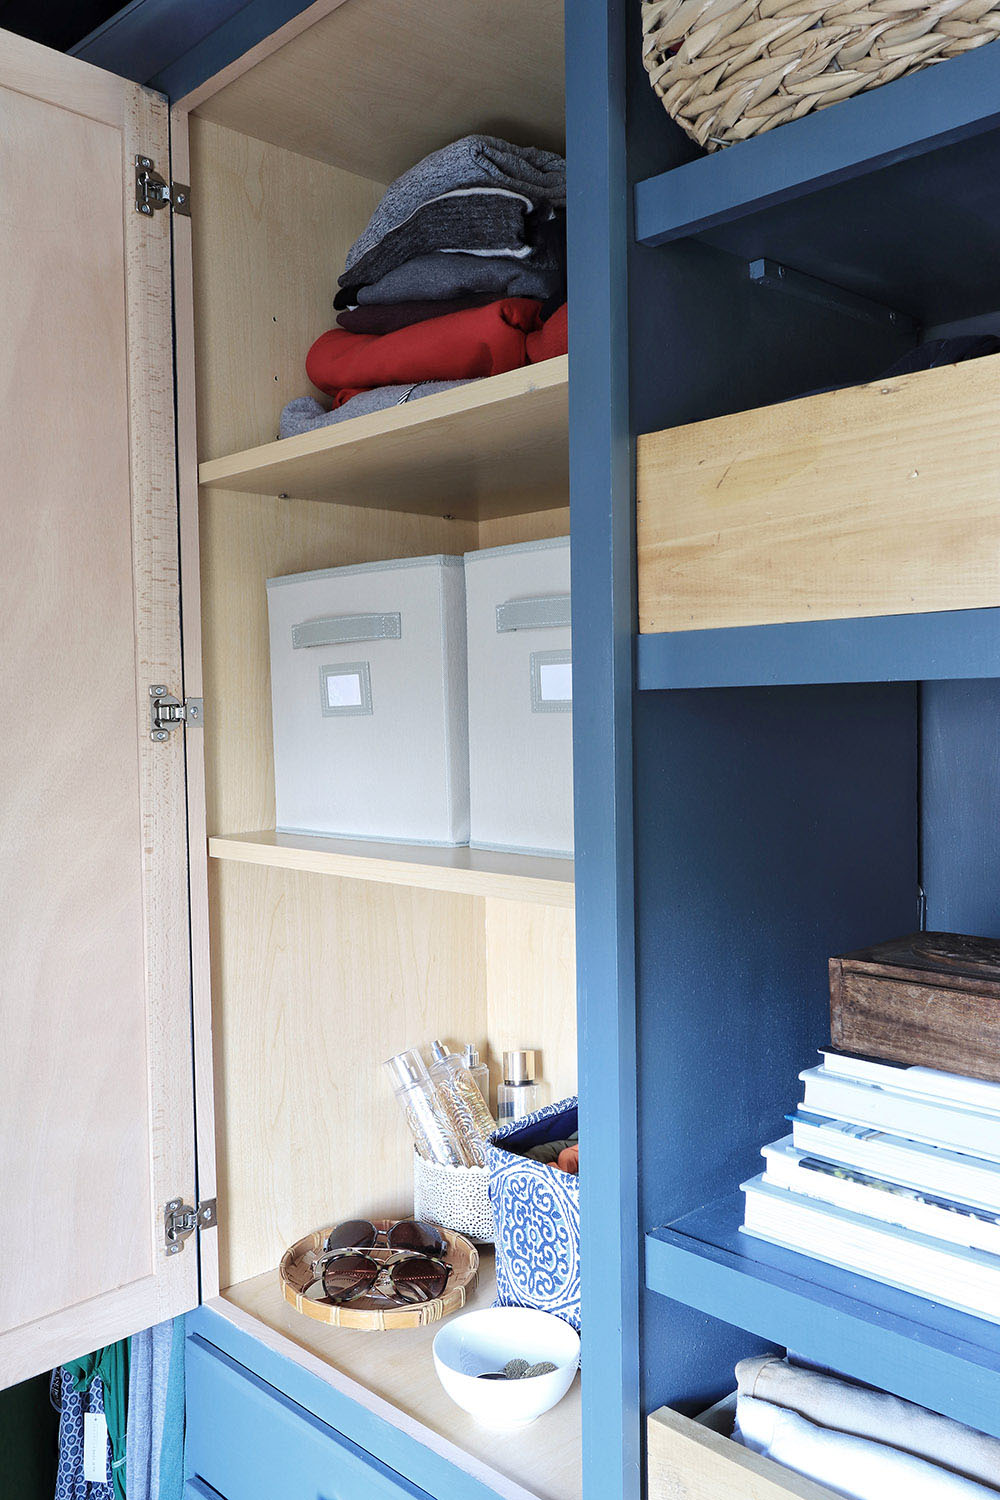 A closet cabinet open with shelves and storage bins